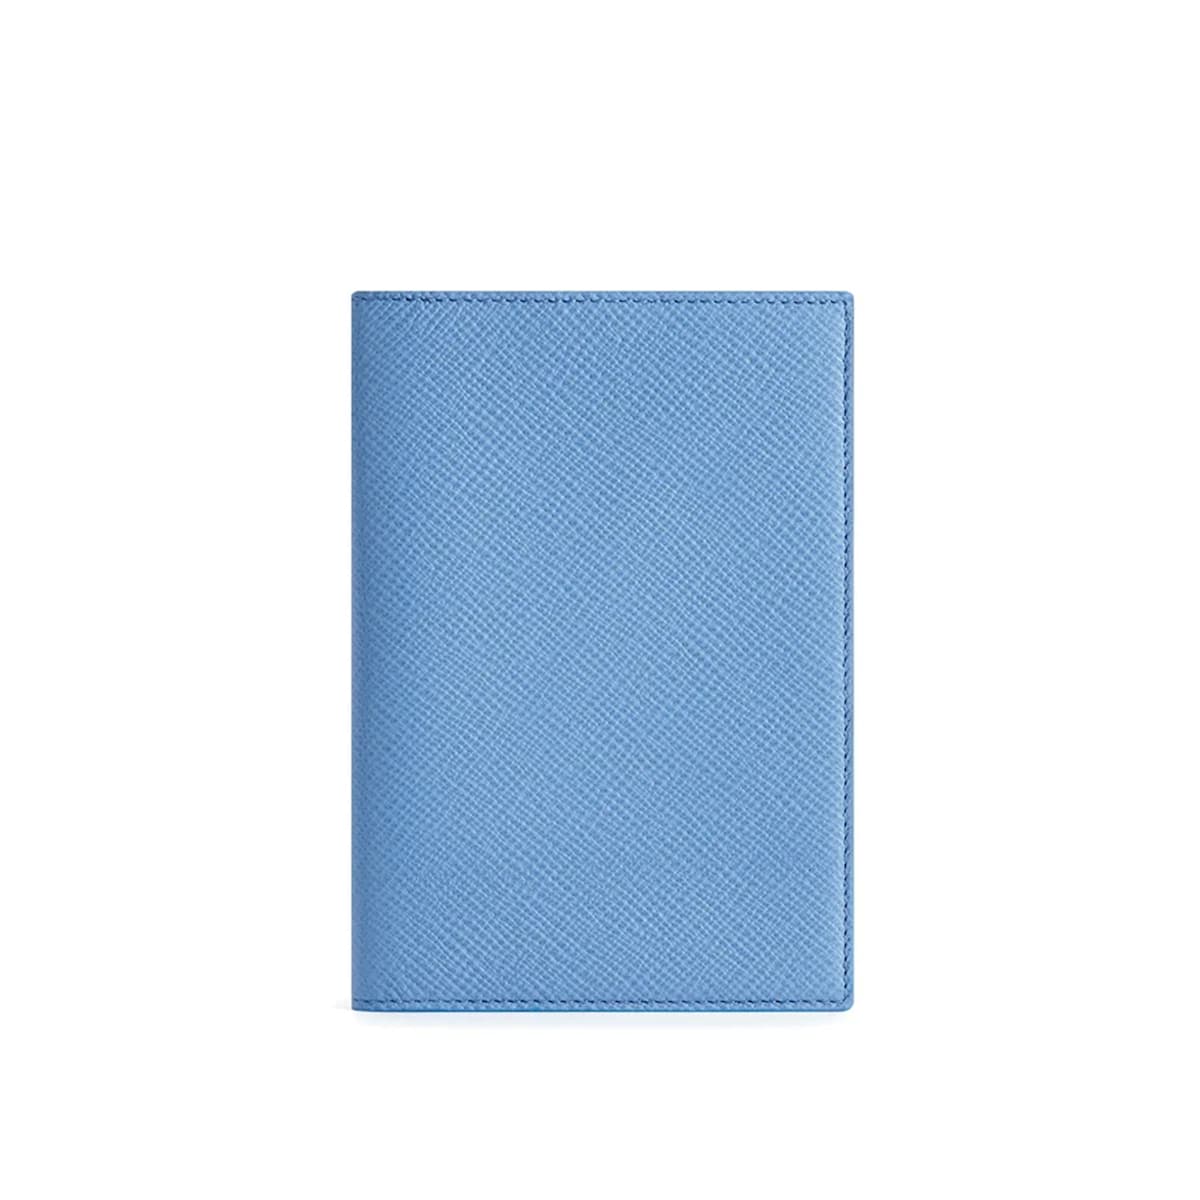 Smythson Inspirations And Ideas Panama Notebook in Nile Blue